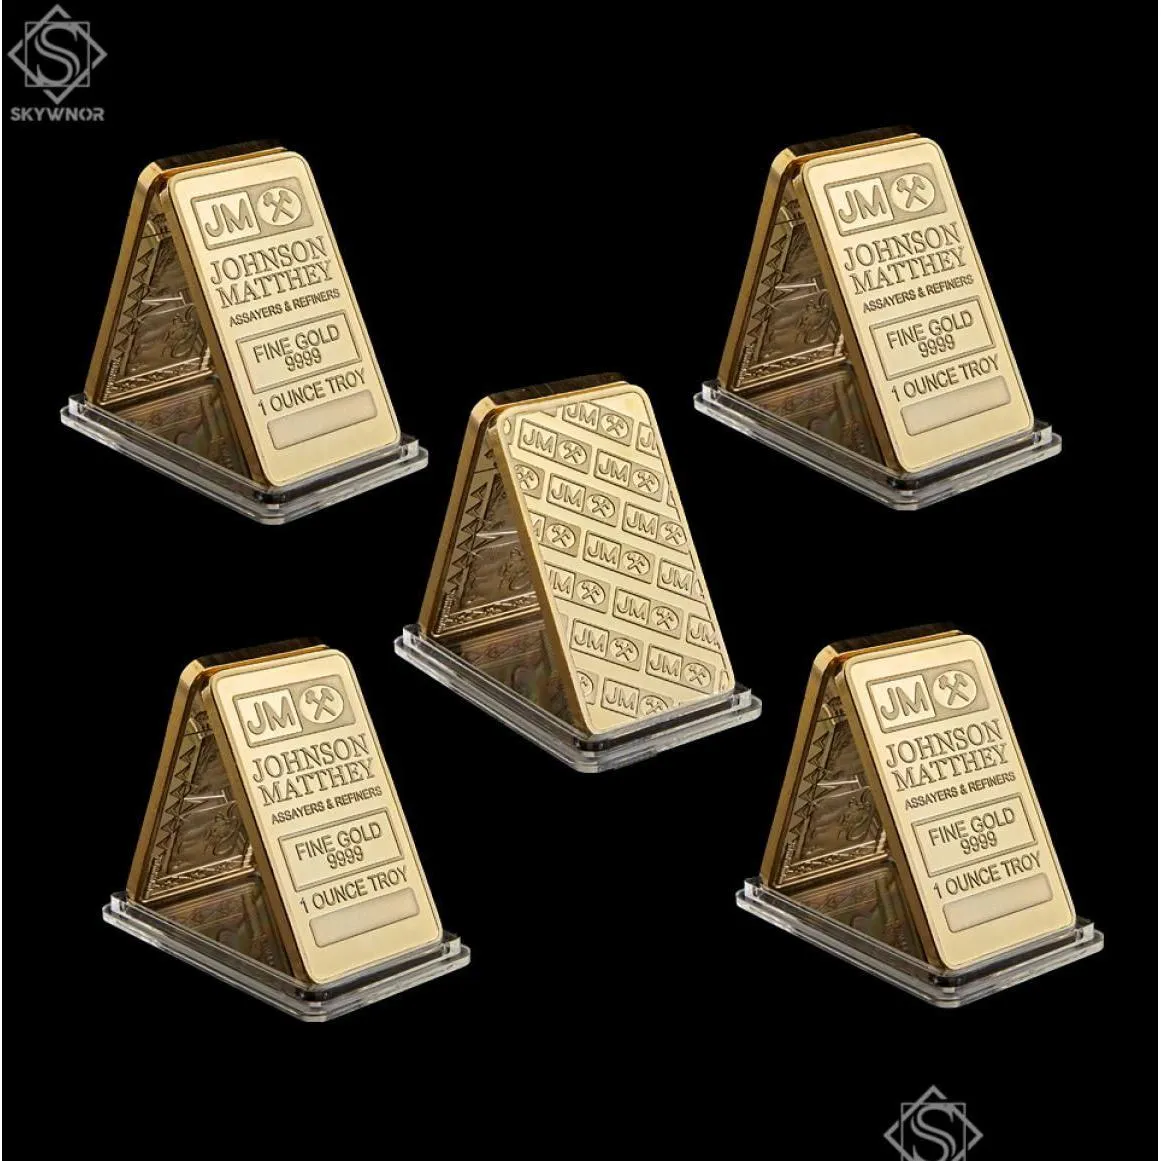 Arts and Crafts 5pcs UK London Replica Fine Gold 999 1 uncja Troy Johnson Matthey Craft Rafiners Barcoin Collectible2258936 DHSVK